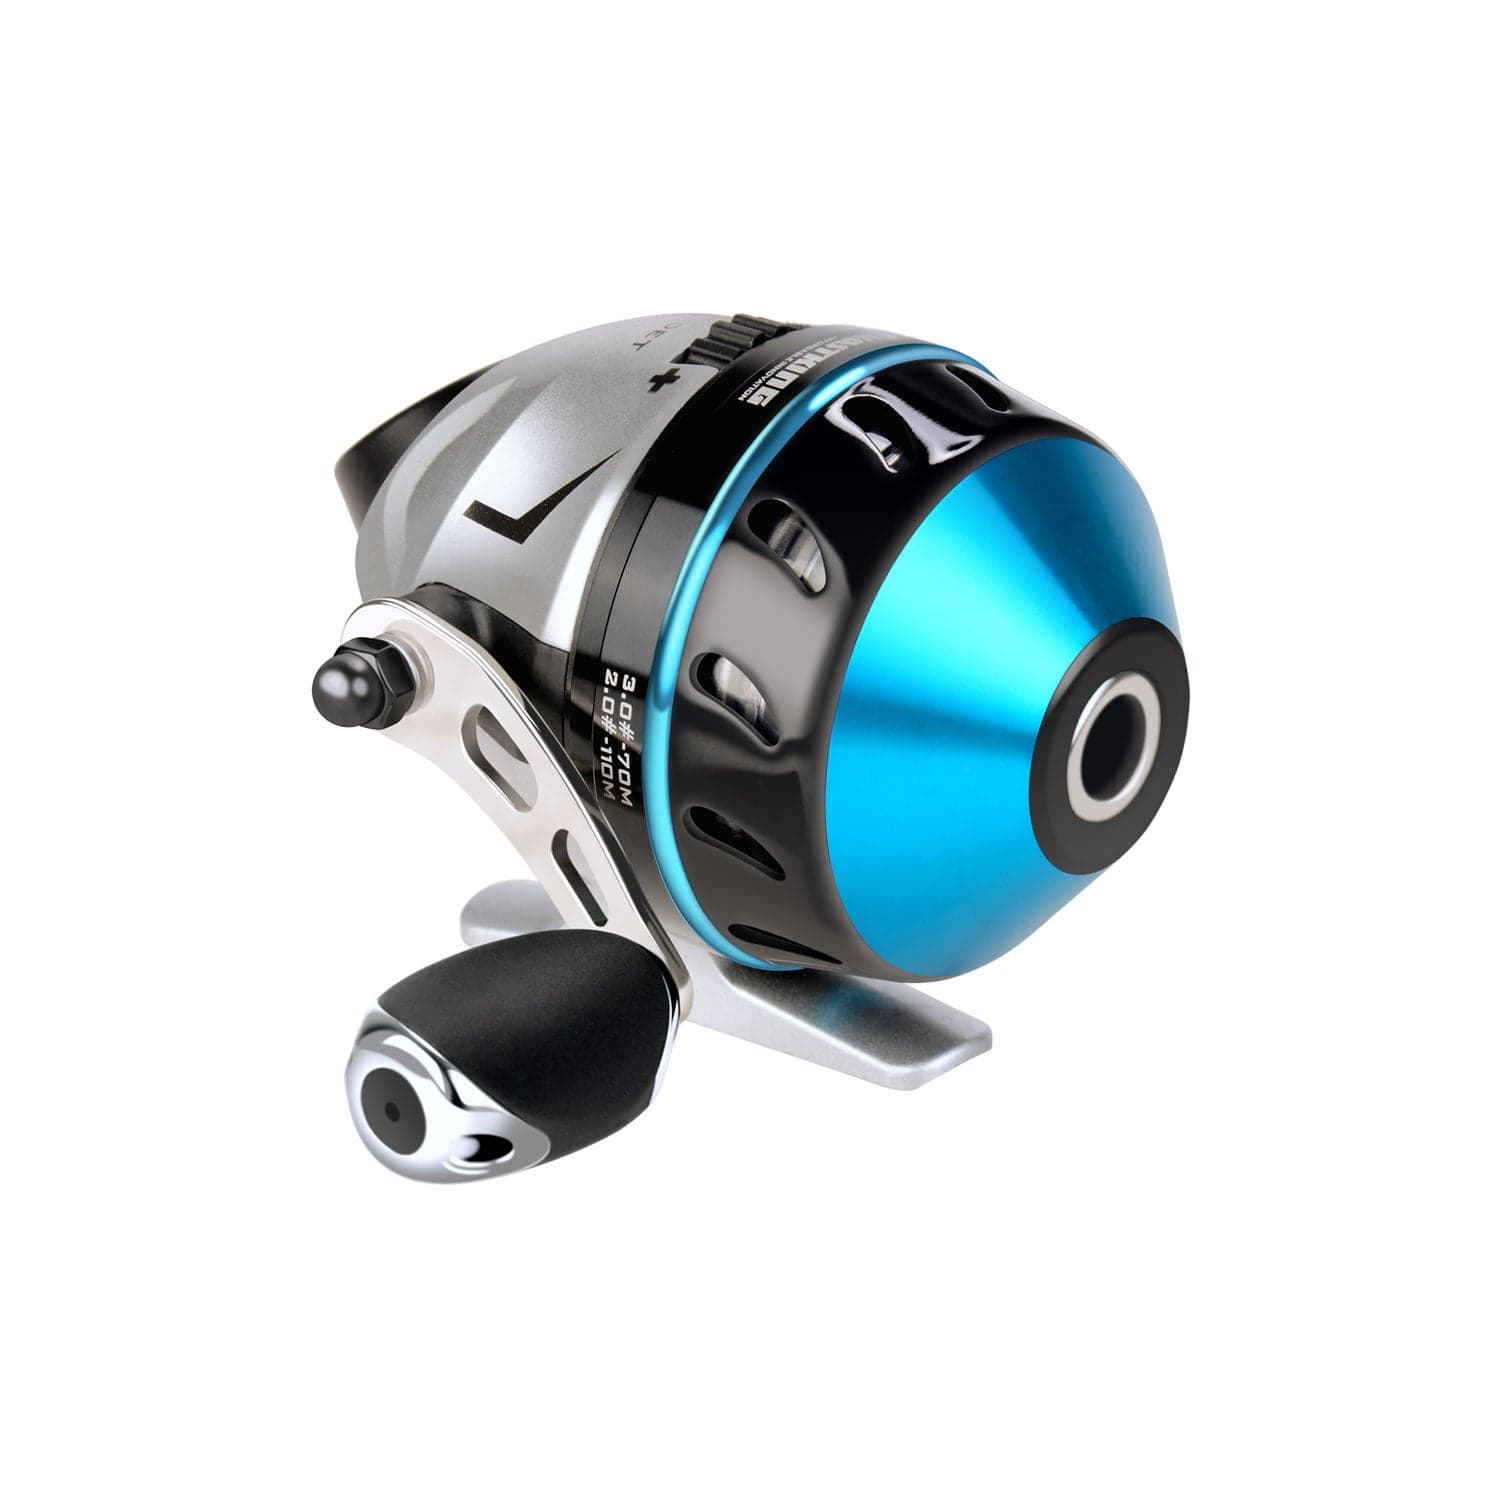 Castfanatic S1 Saltwater Spinning Fishing Reels 6+1BB Double